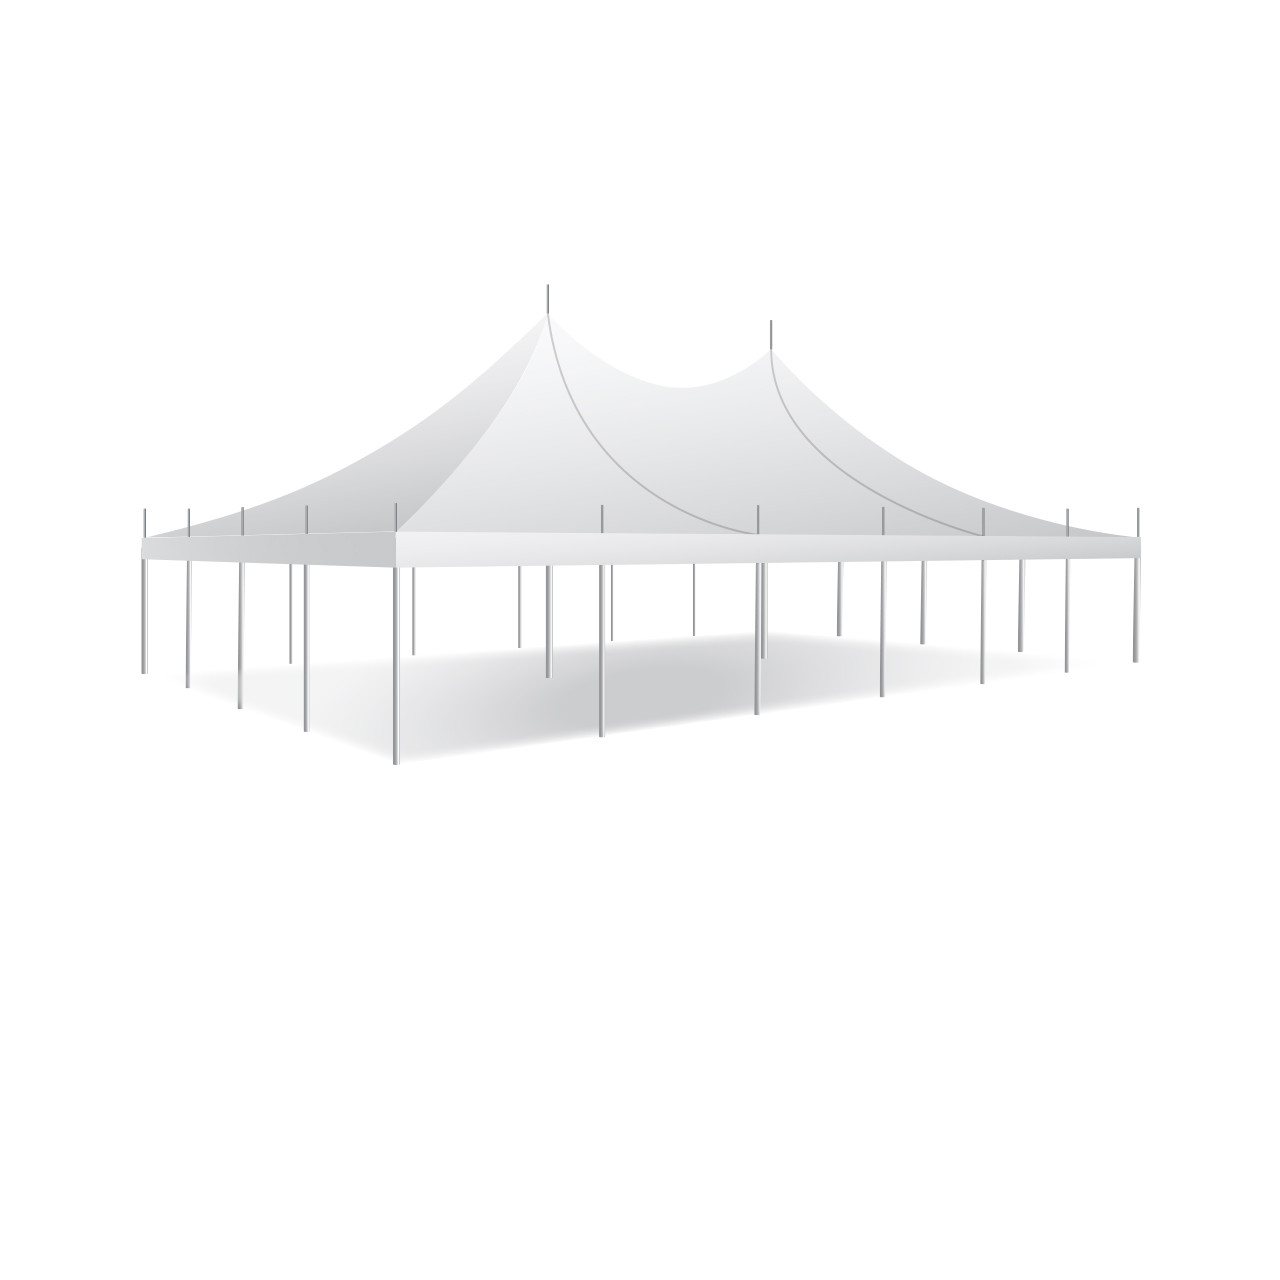 30' x 45' Premiere I Series High Peak Pole Tent, Sectional Tent Top, Complete